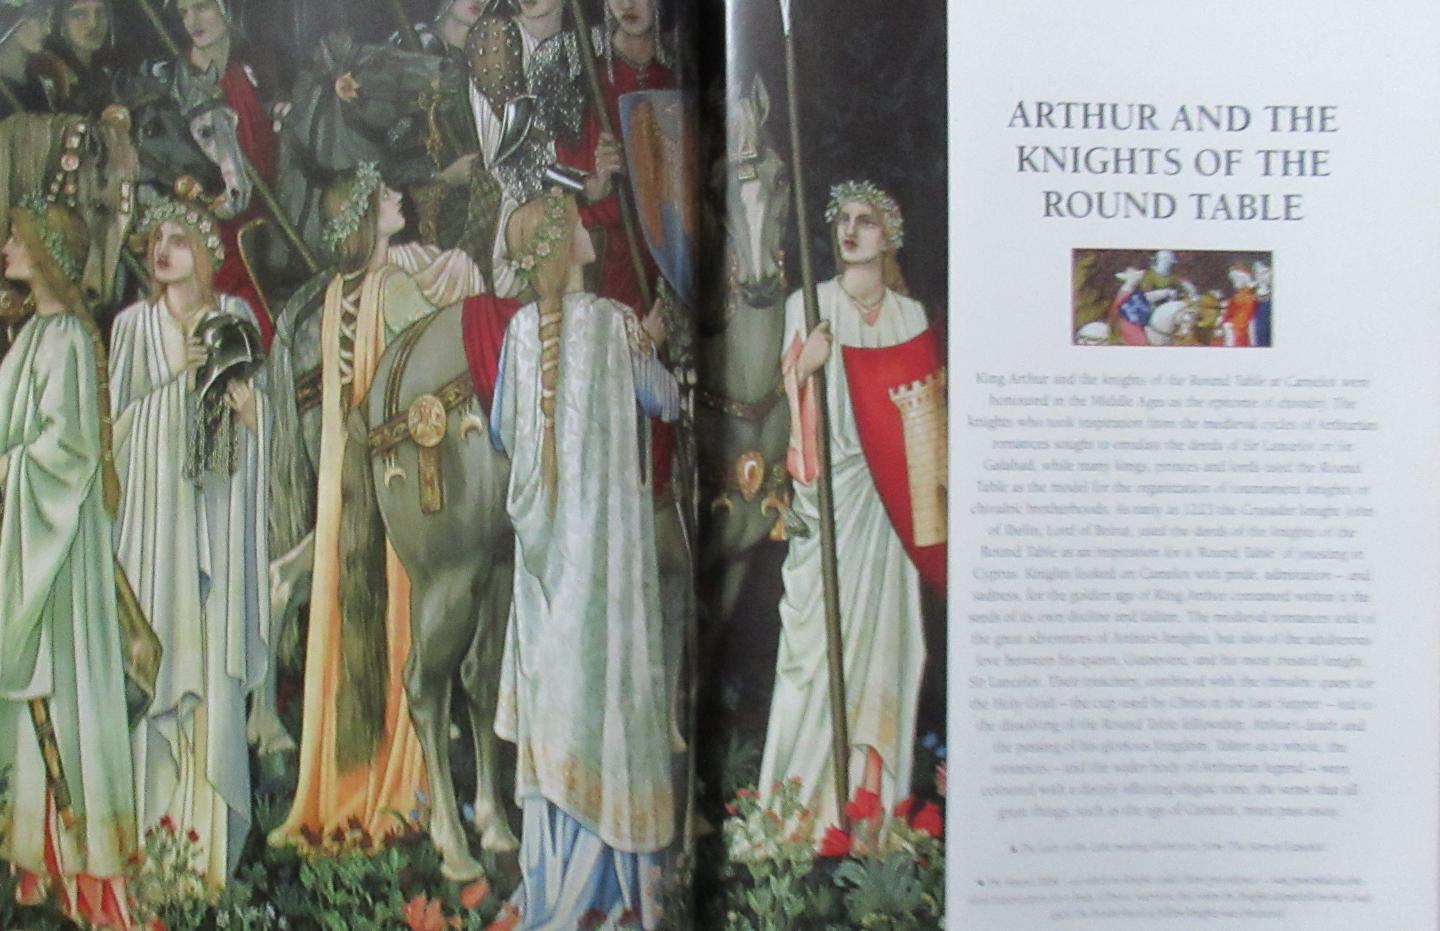 Phillips, Charles - Knigths and the age of Chivalry